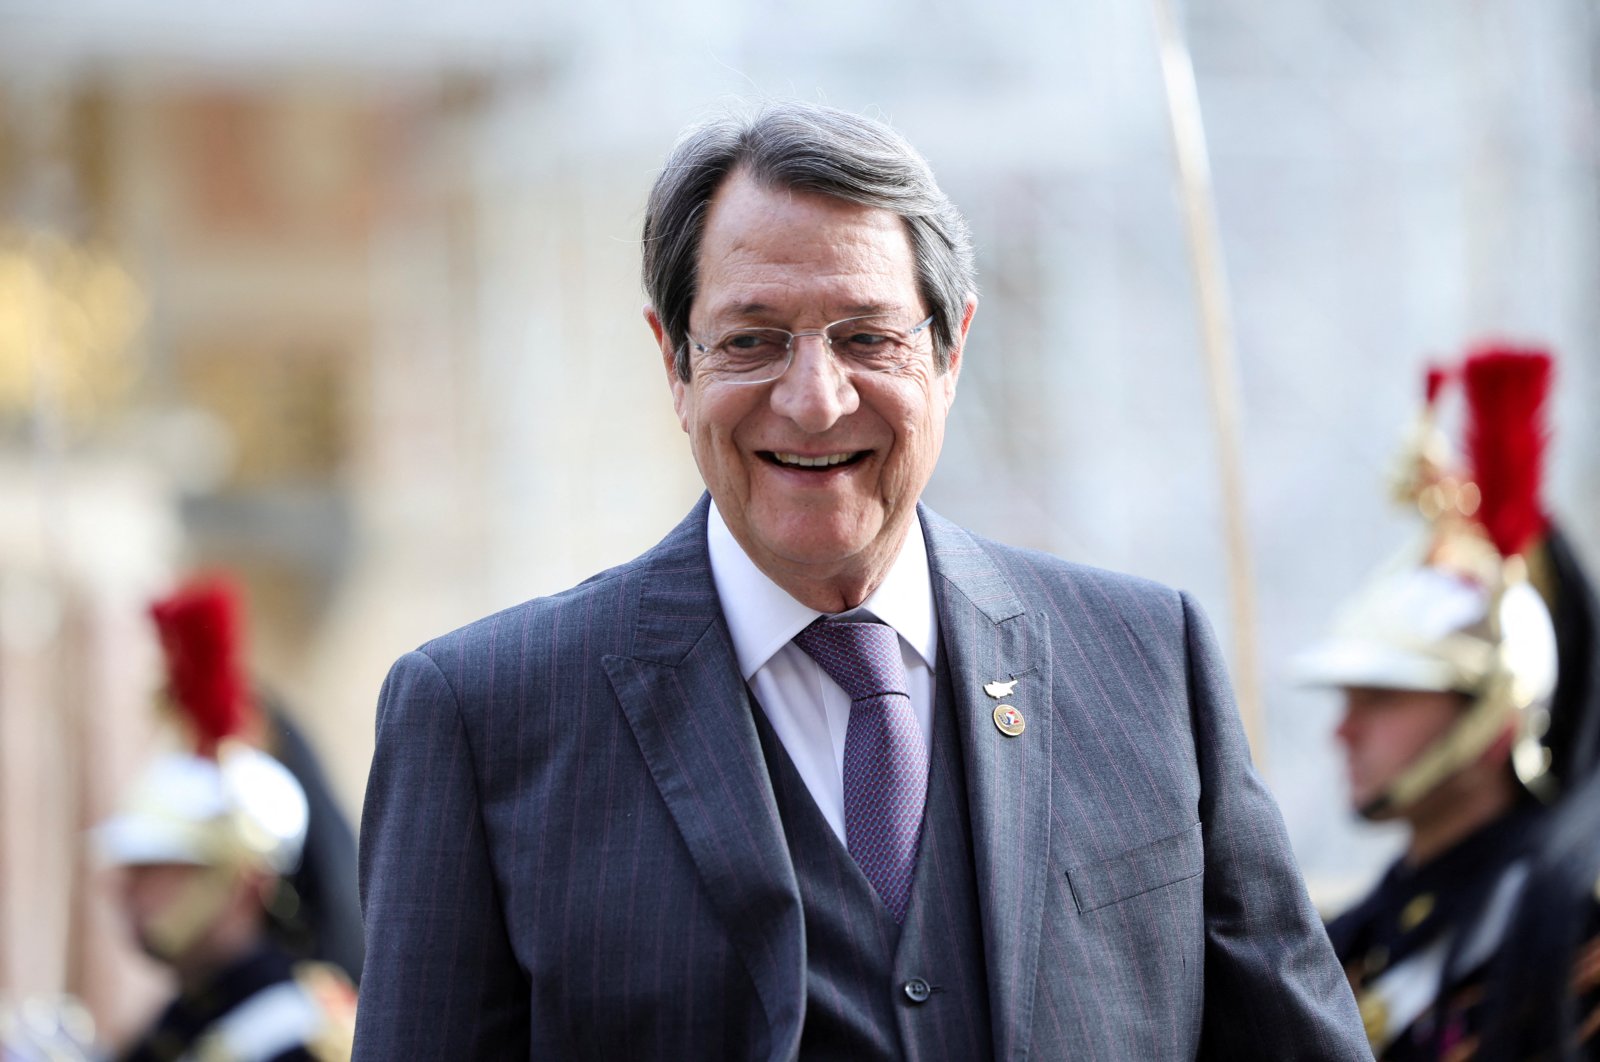 Greek Cypriot leader Nicos Anastasiades arrives to attend an informal summit of EU leaders at the Chateau de Versailles, near Paris, France, March 11, 2022. (Reuters Photo)